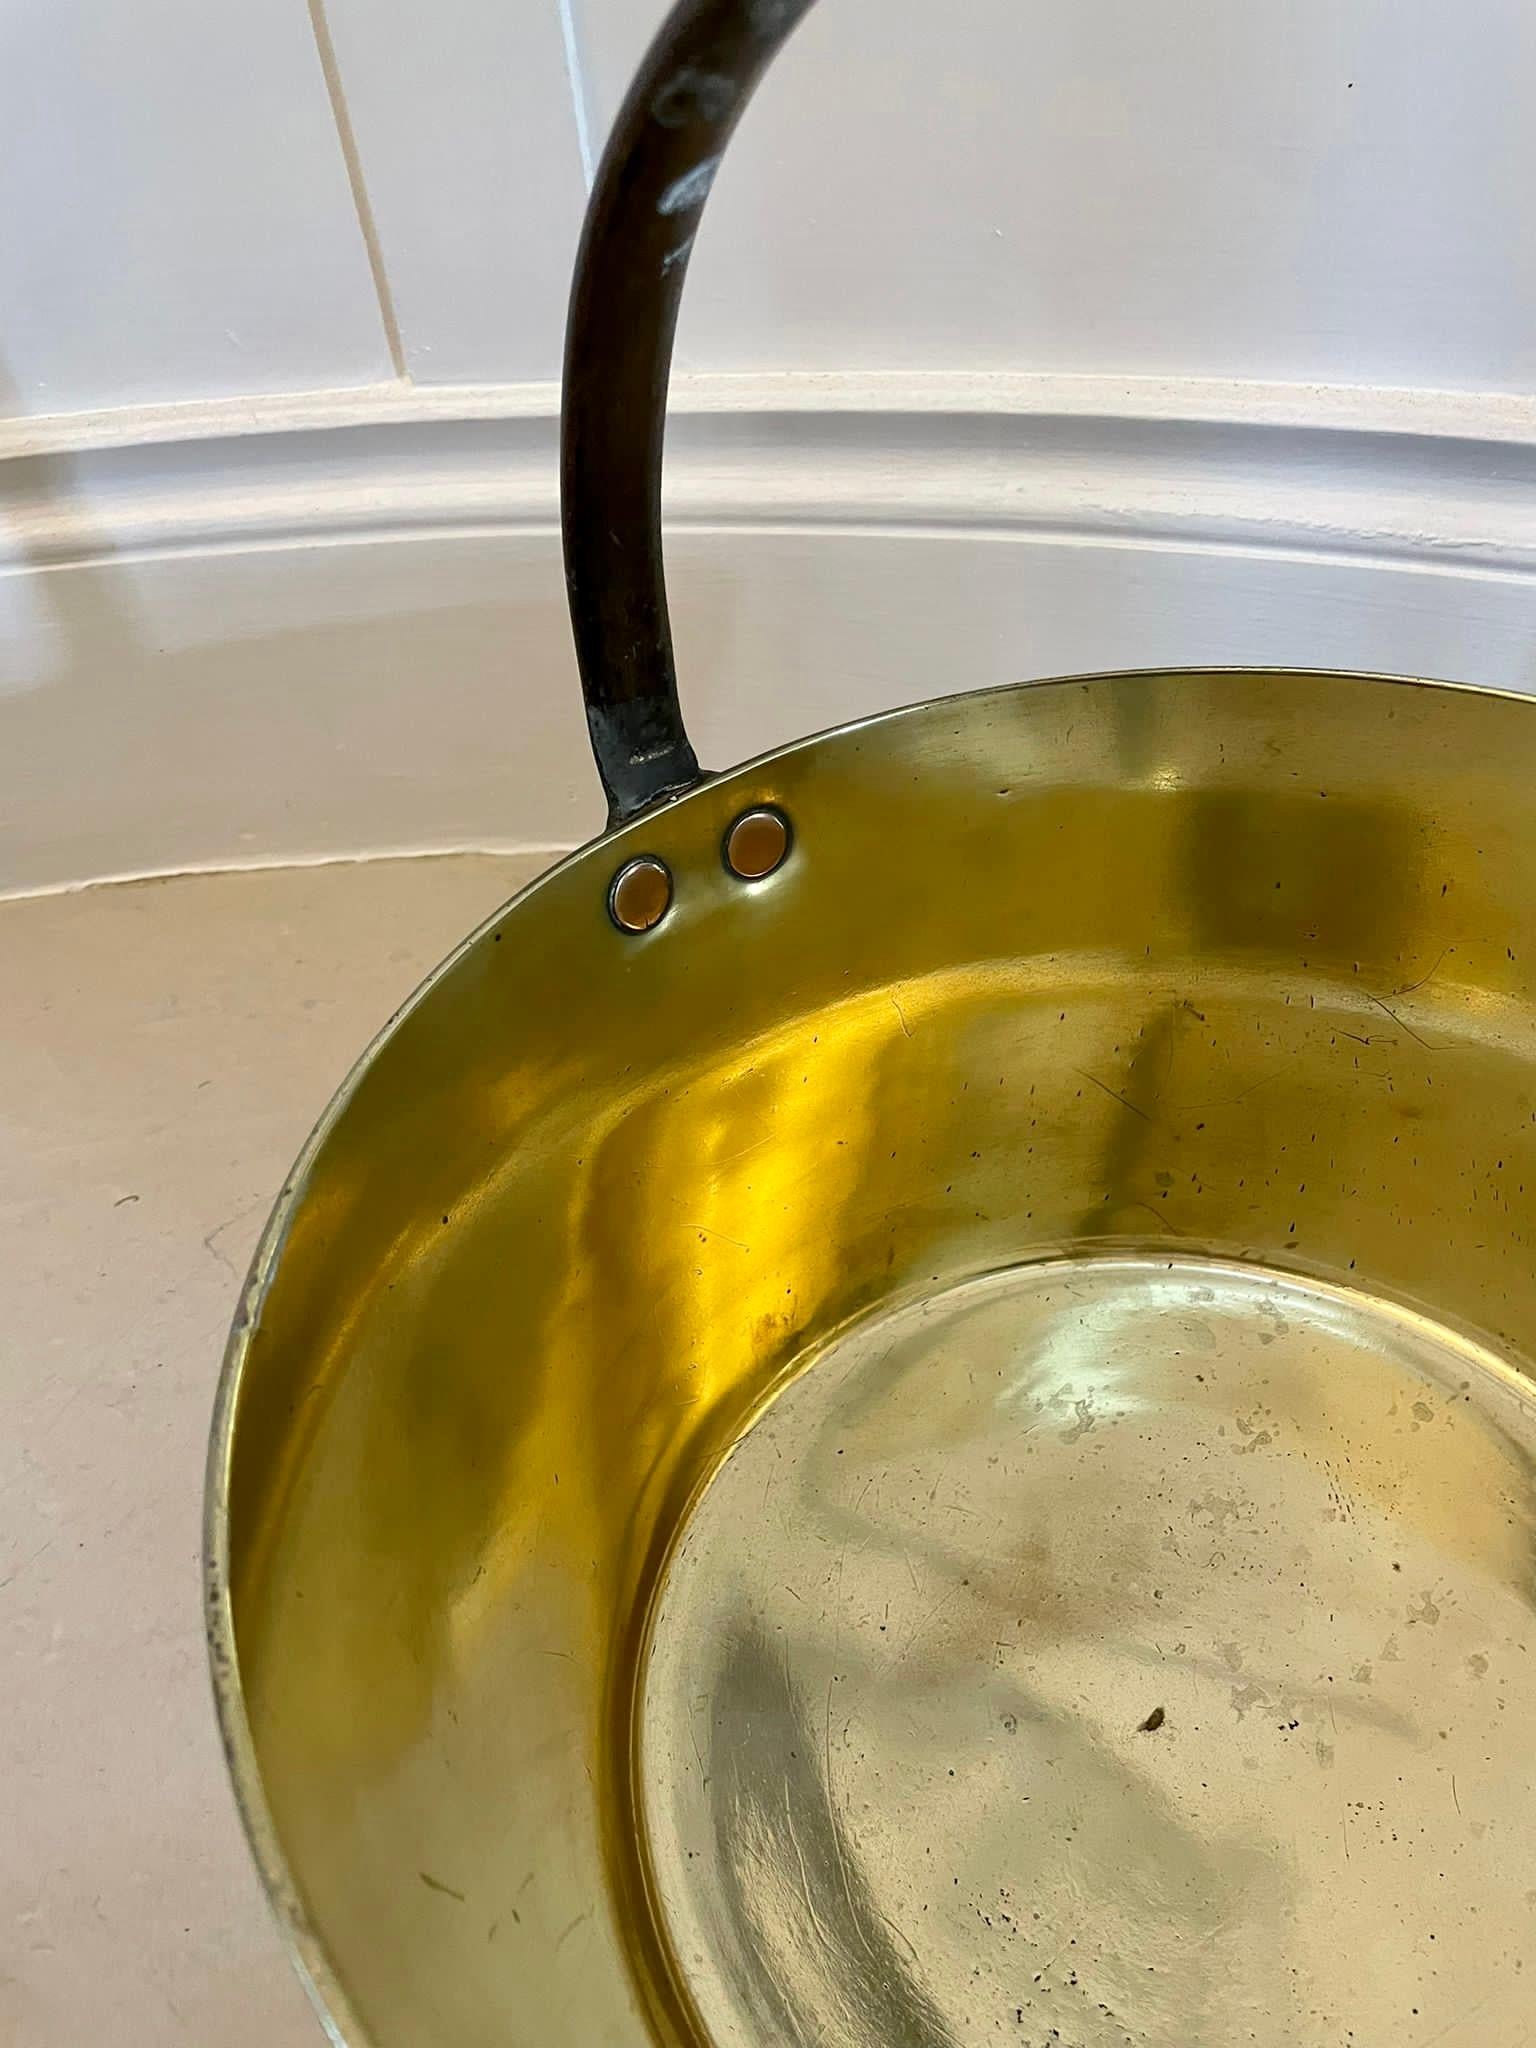 Large antique Victorian quality brass pail with original iron handle

In wonderful original condition

H 16 x W 29.5 x D 29.5cm
Date 1850
